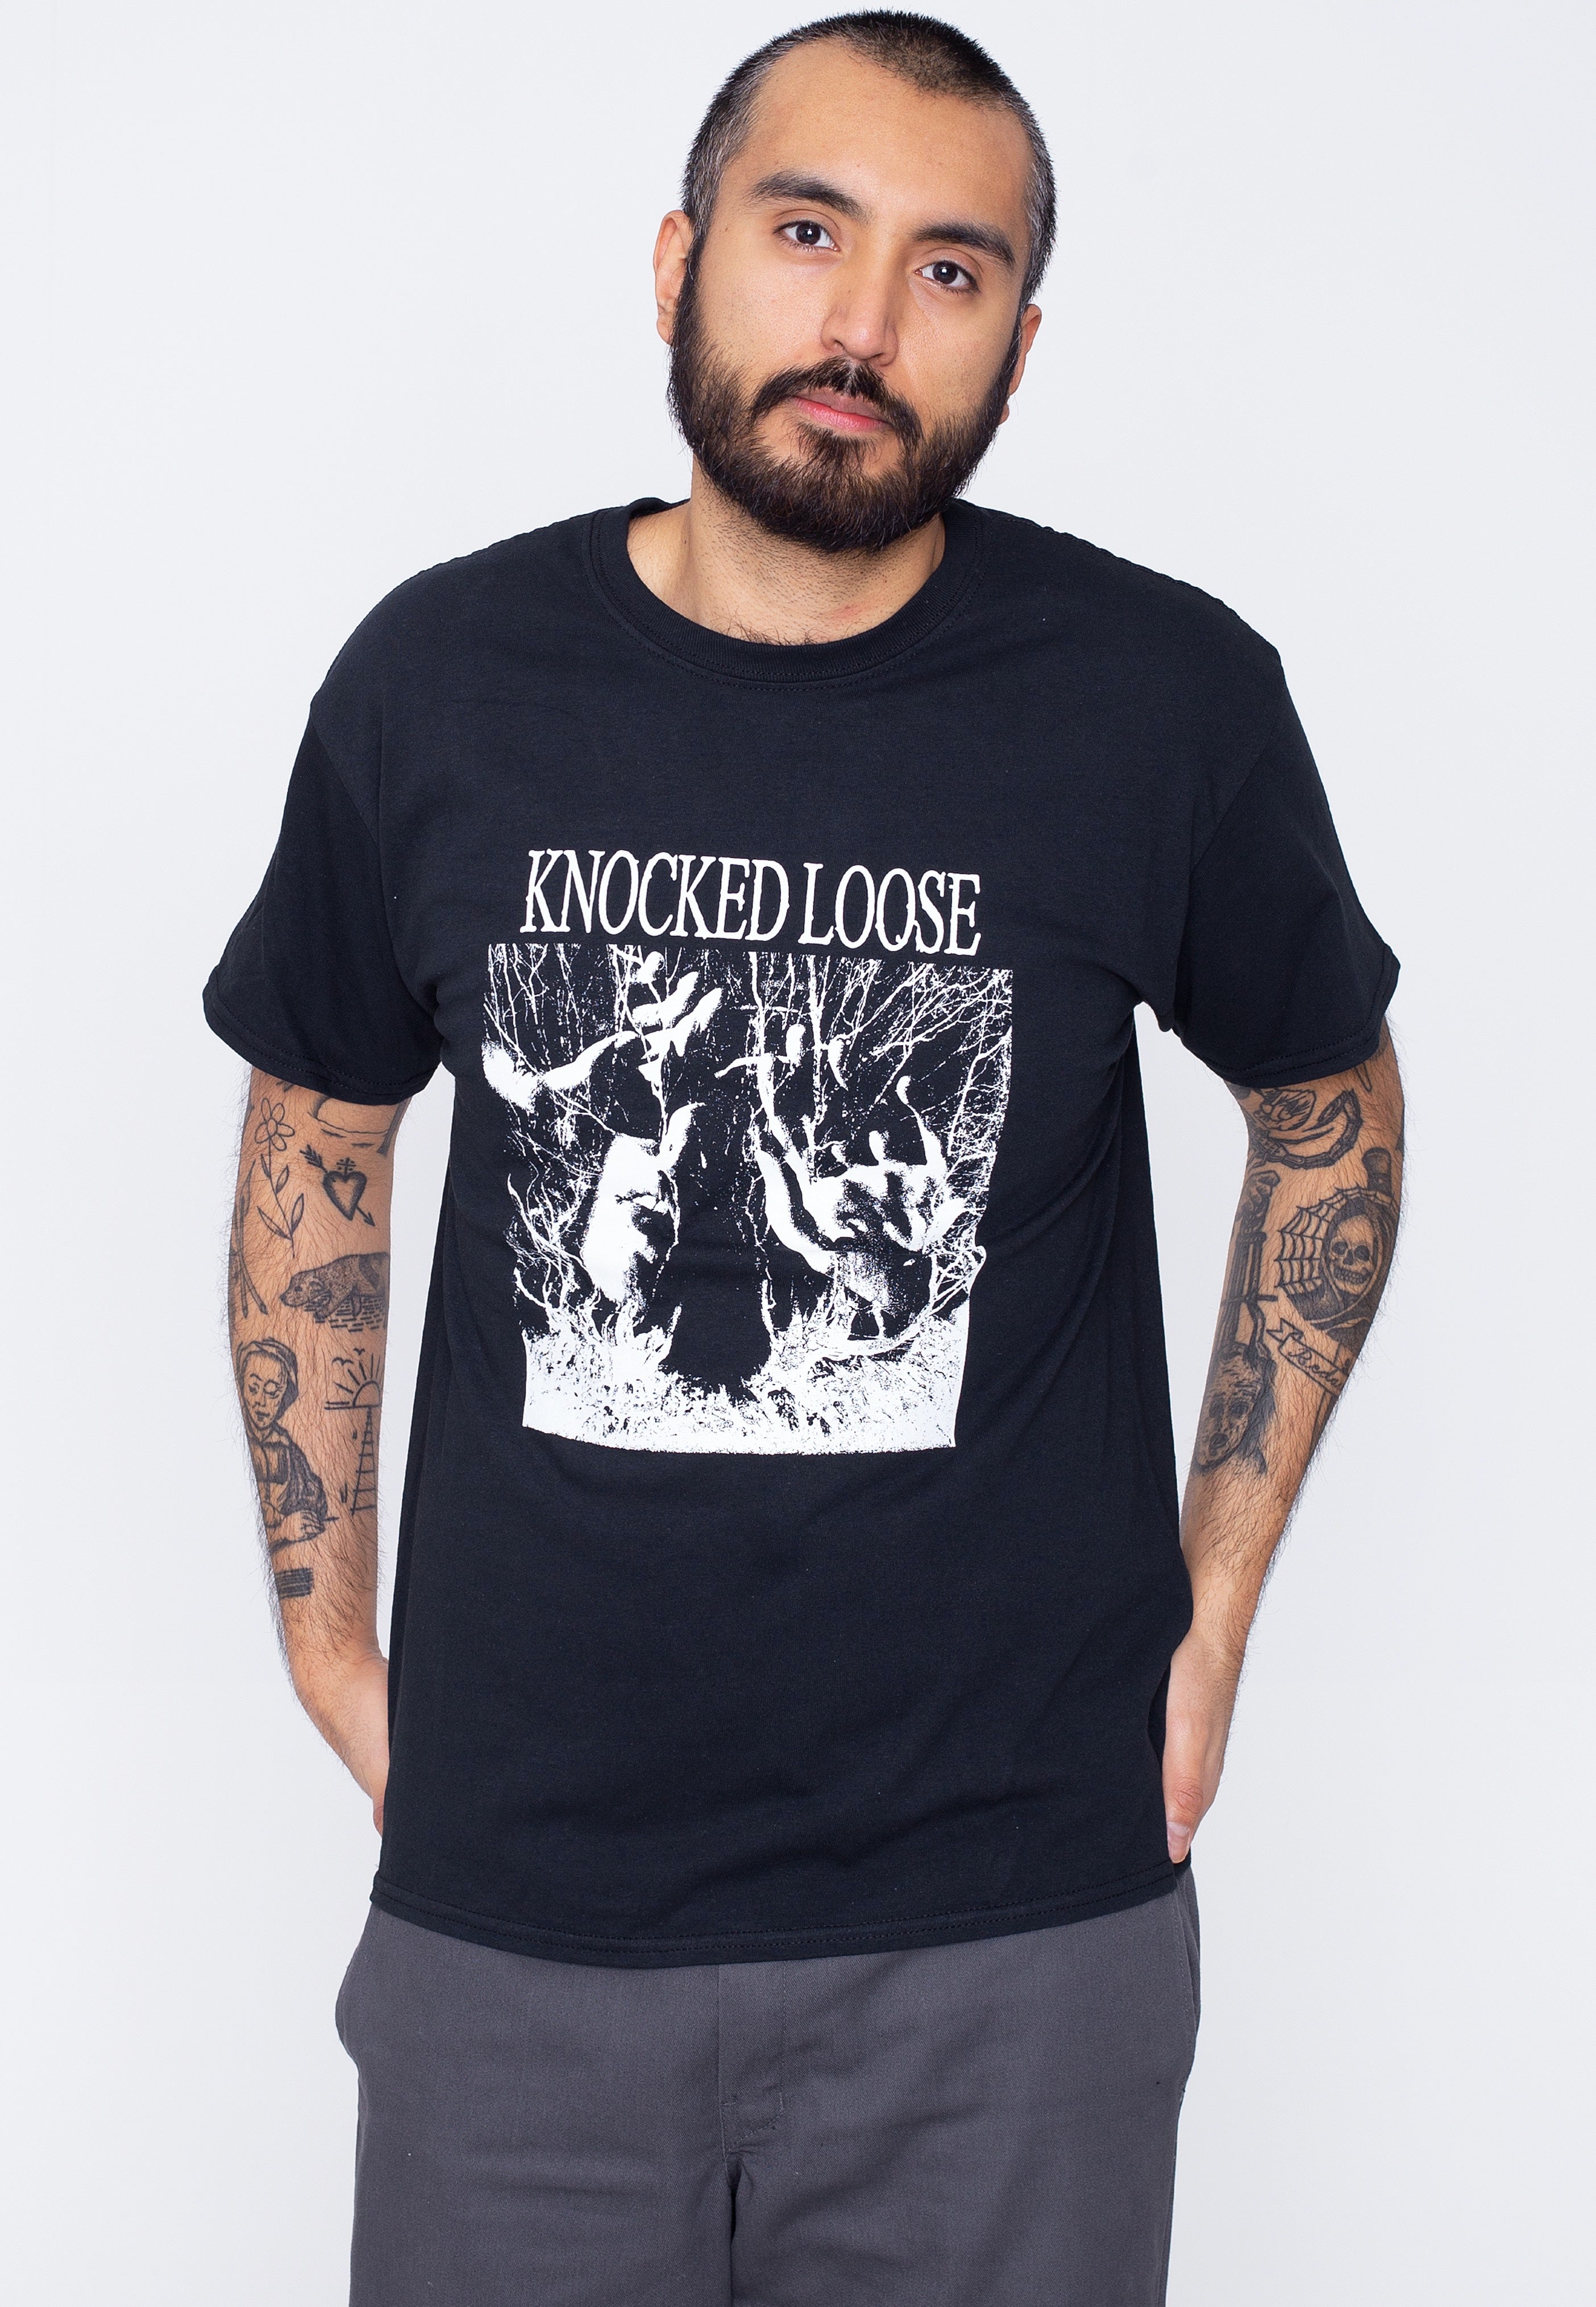 Knocked Loose - I Am With You Now - T-Shirt | Men-Image